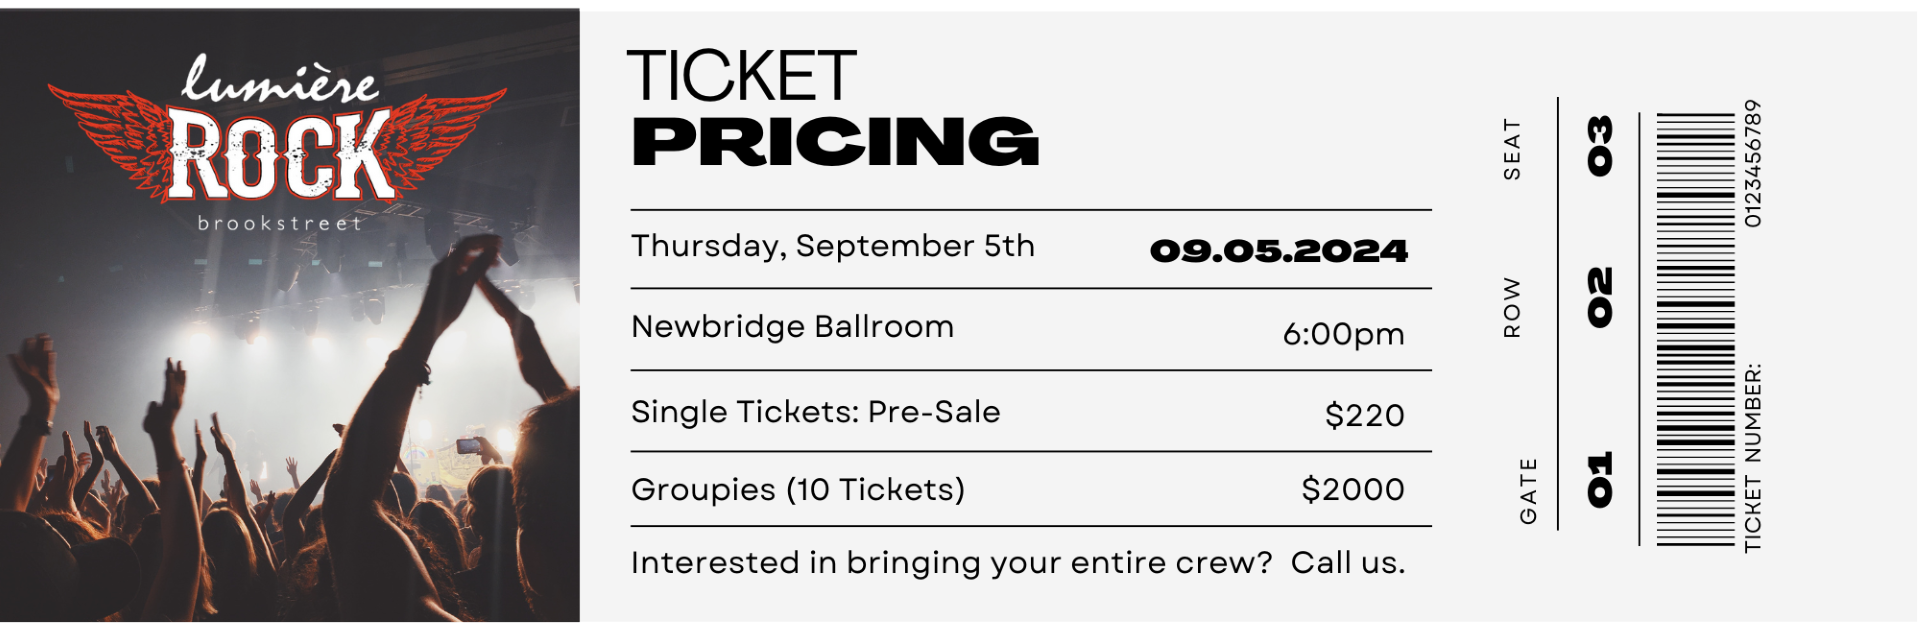 ticket with pricing details